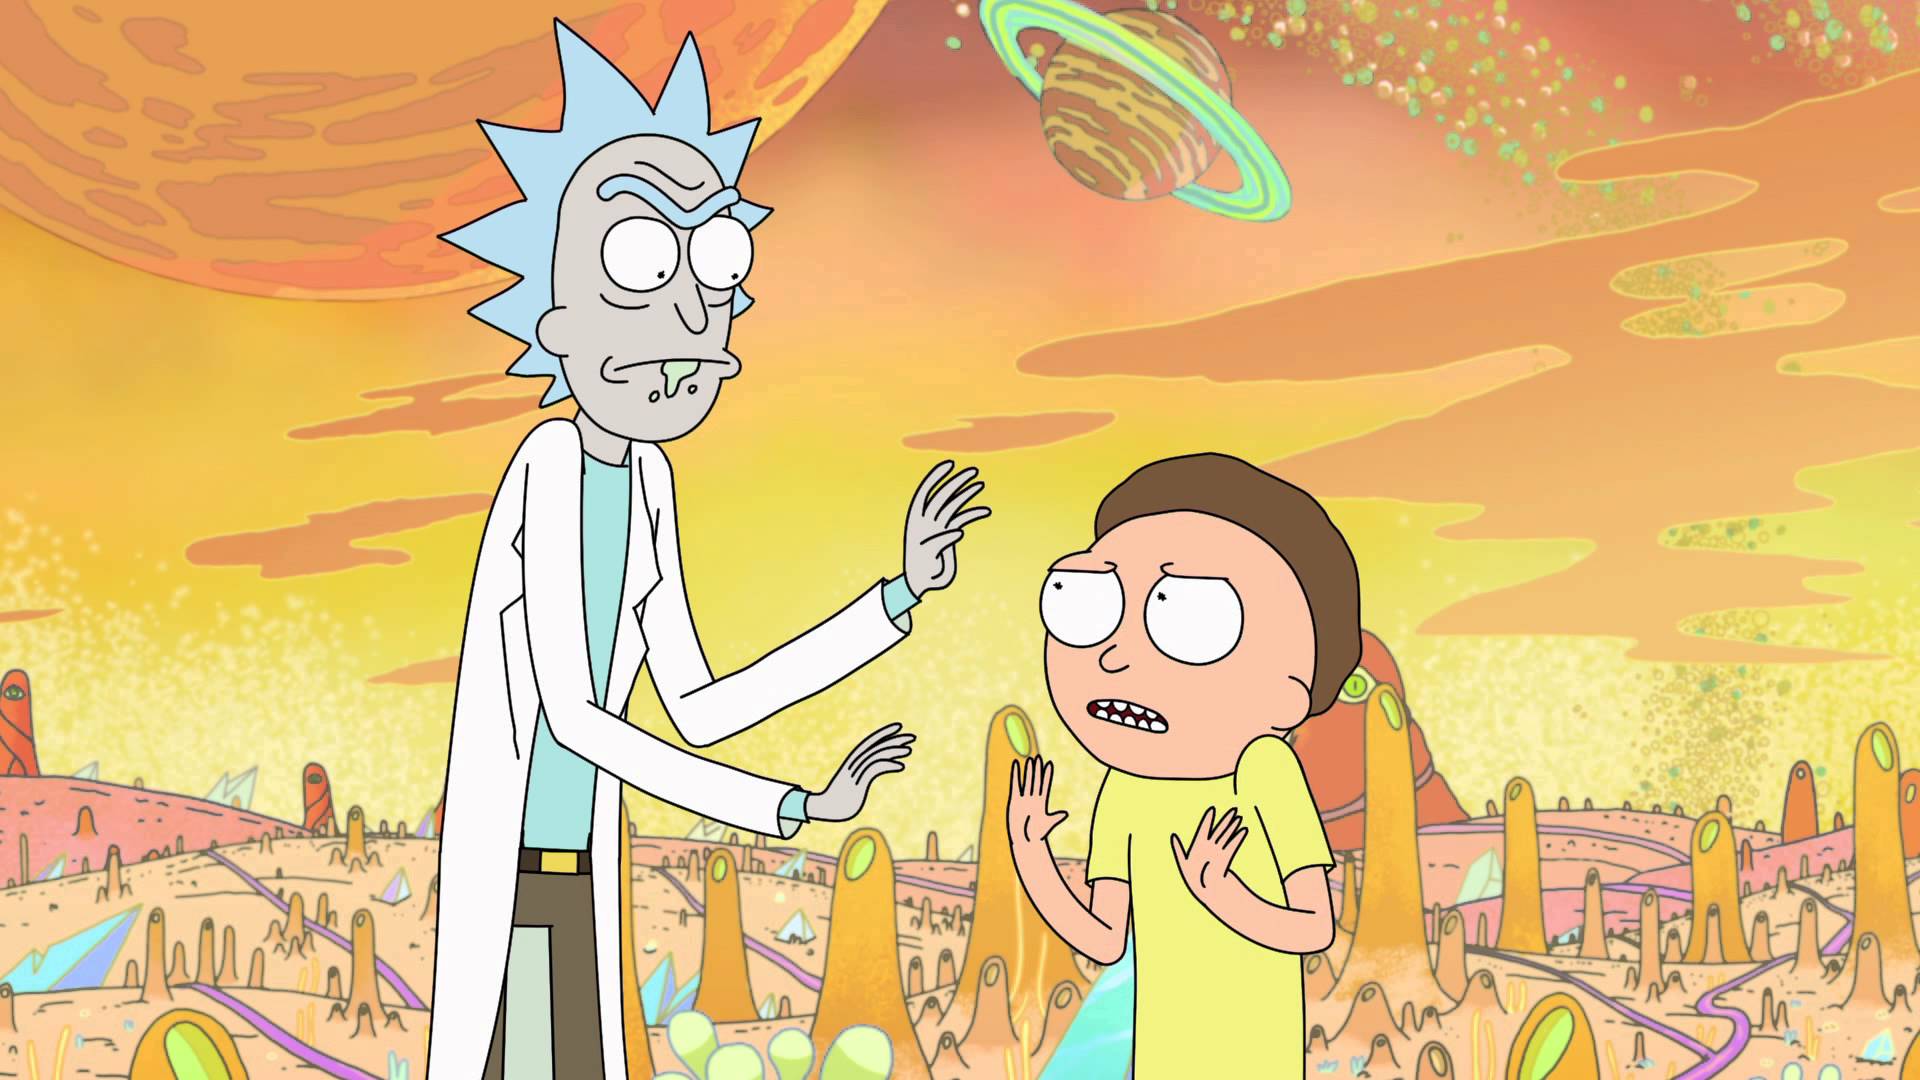 tv show, rick and morty, morty smith, rick sanchez Full HD